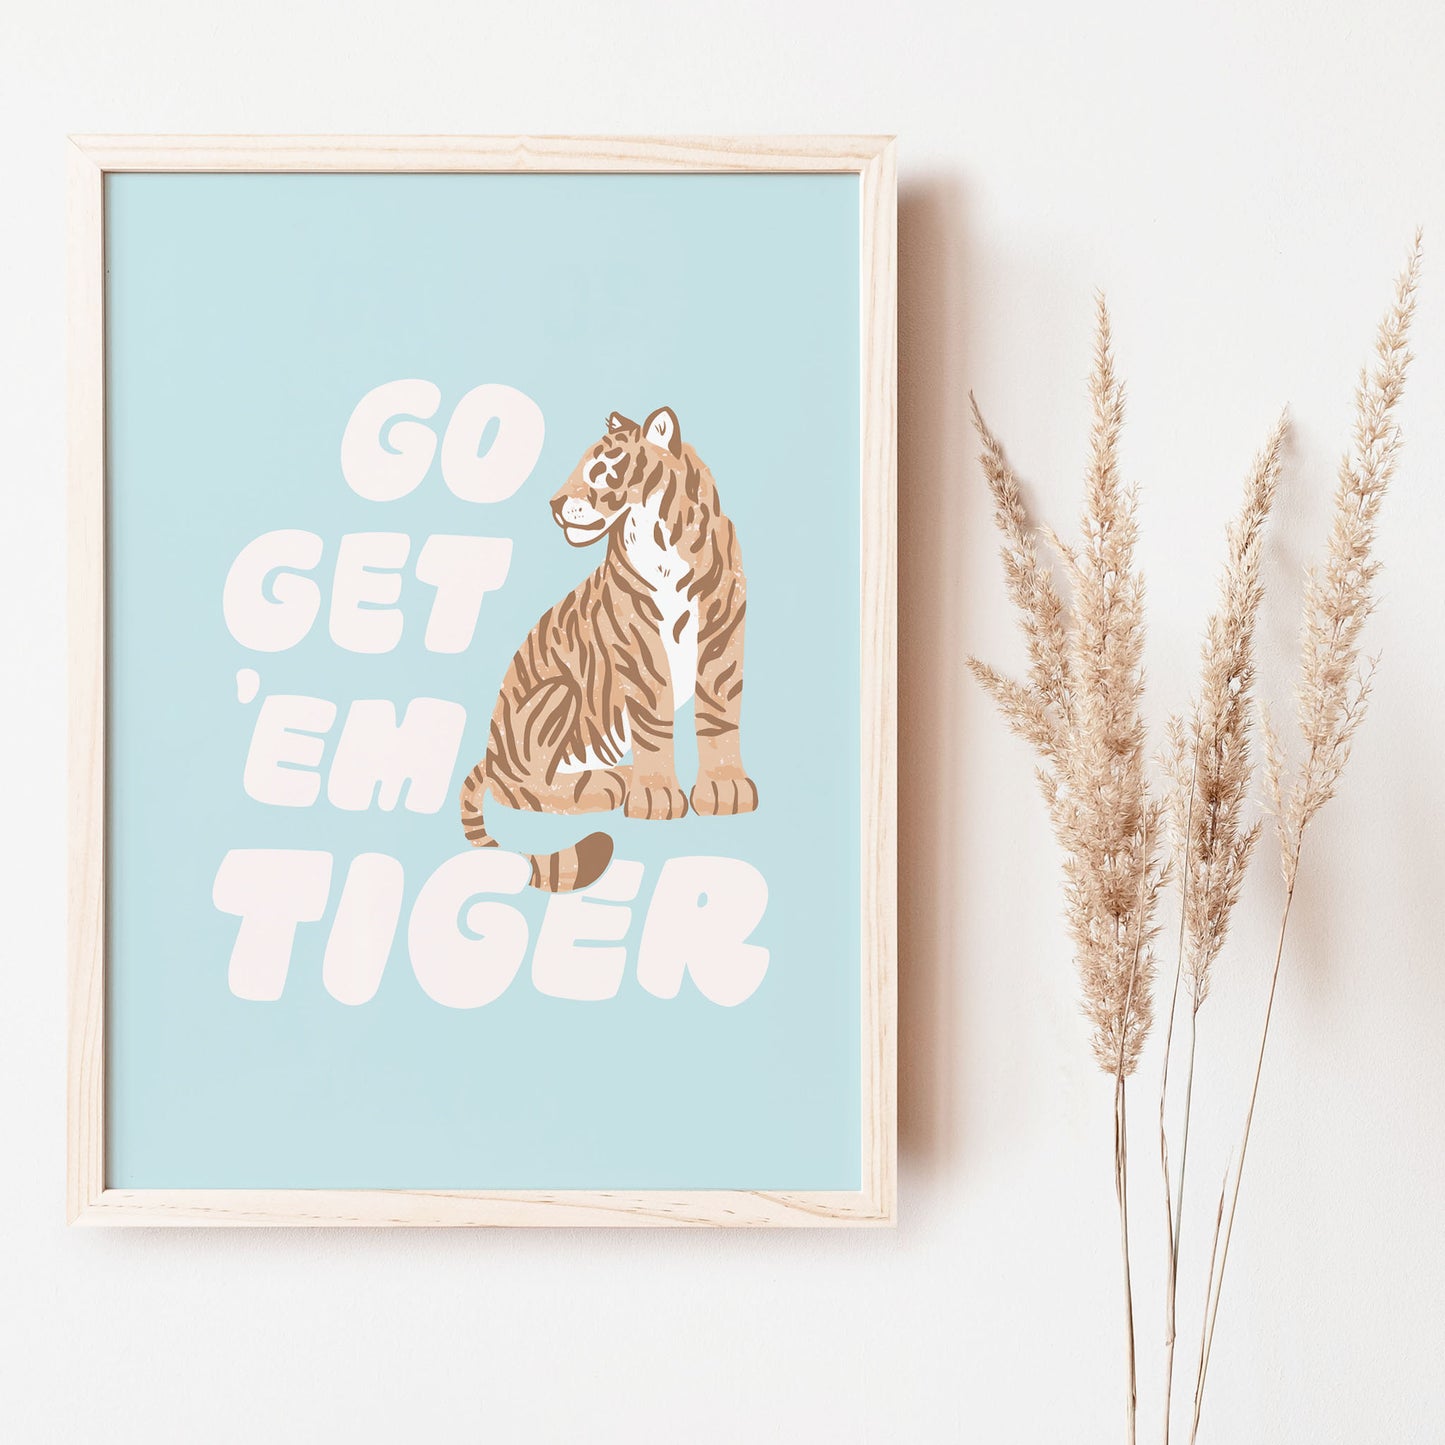 Go Get 'Em Tiger art print in blue perfect for kids spaces